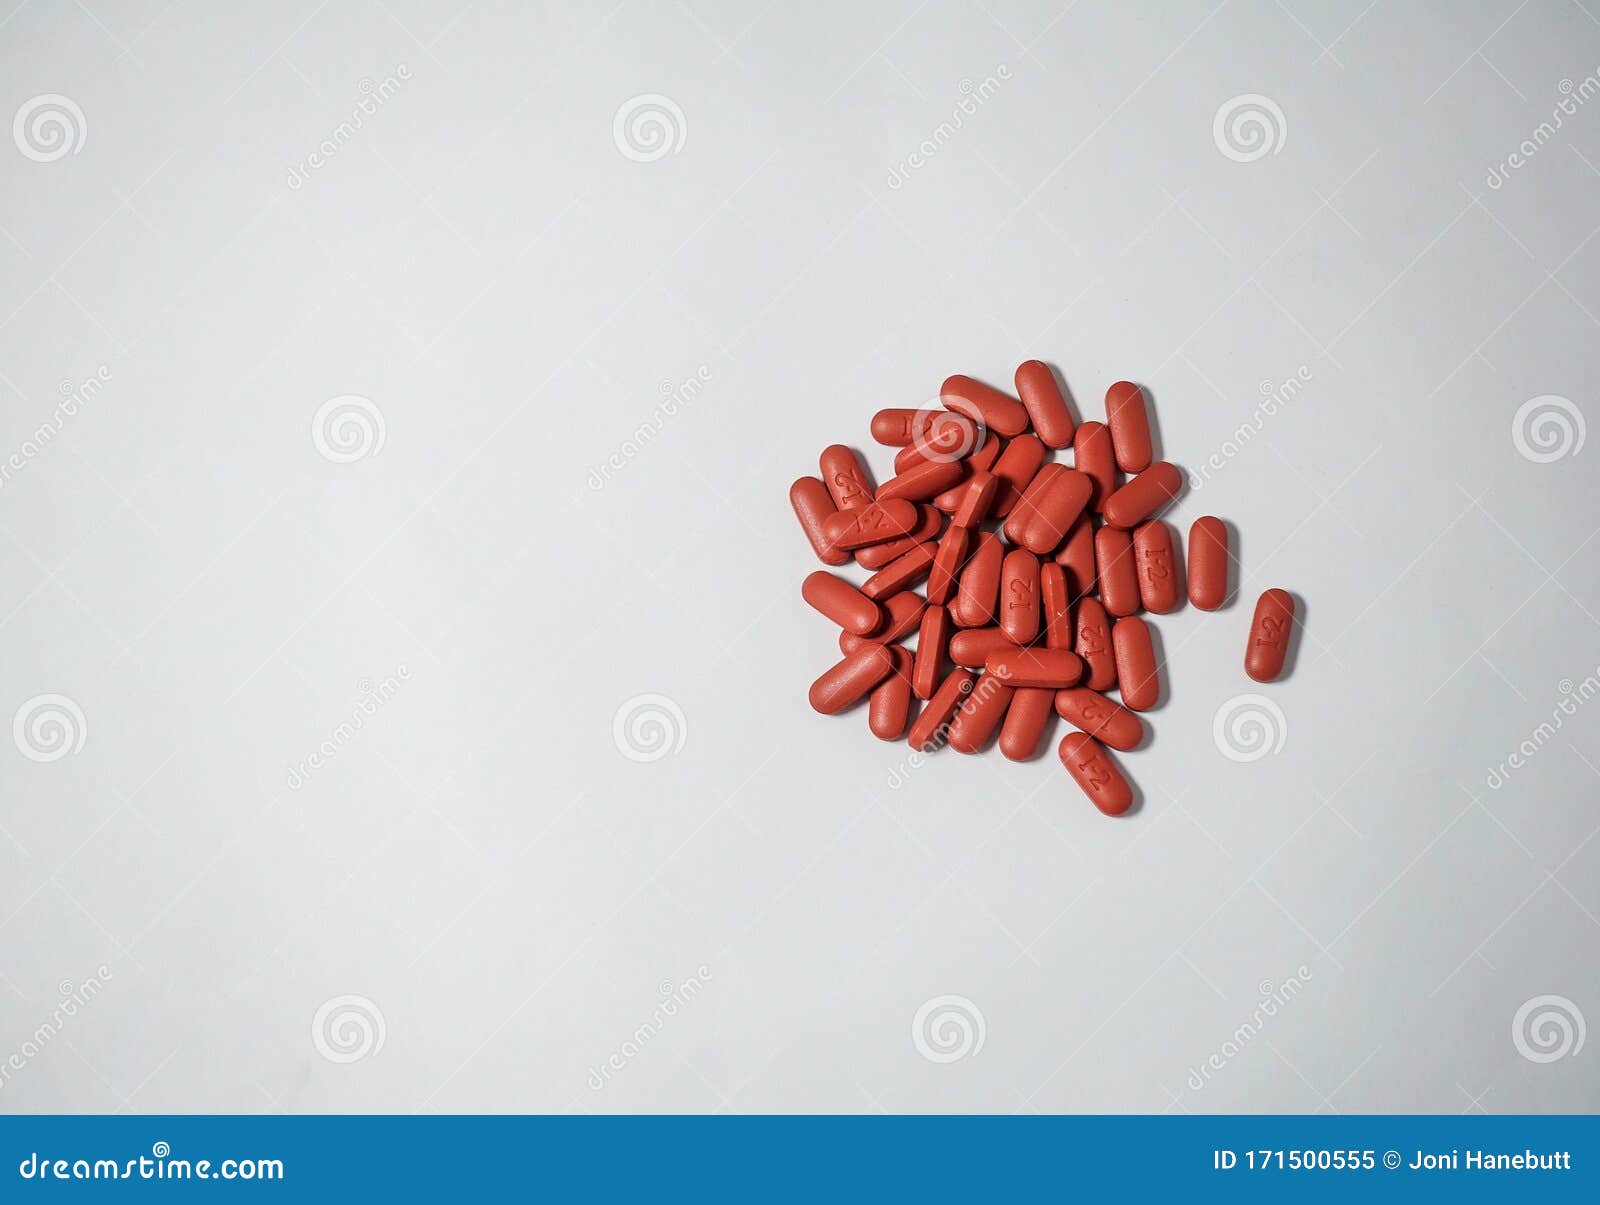 semafor enkelt gang Lily A Pile of Red Tablet Medication in Pill Form Editorial Image - Image of  object, closeup: 171500555